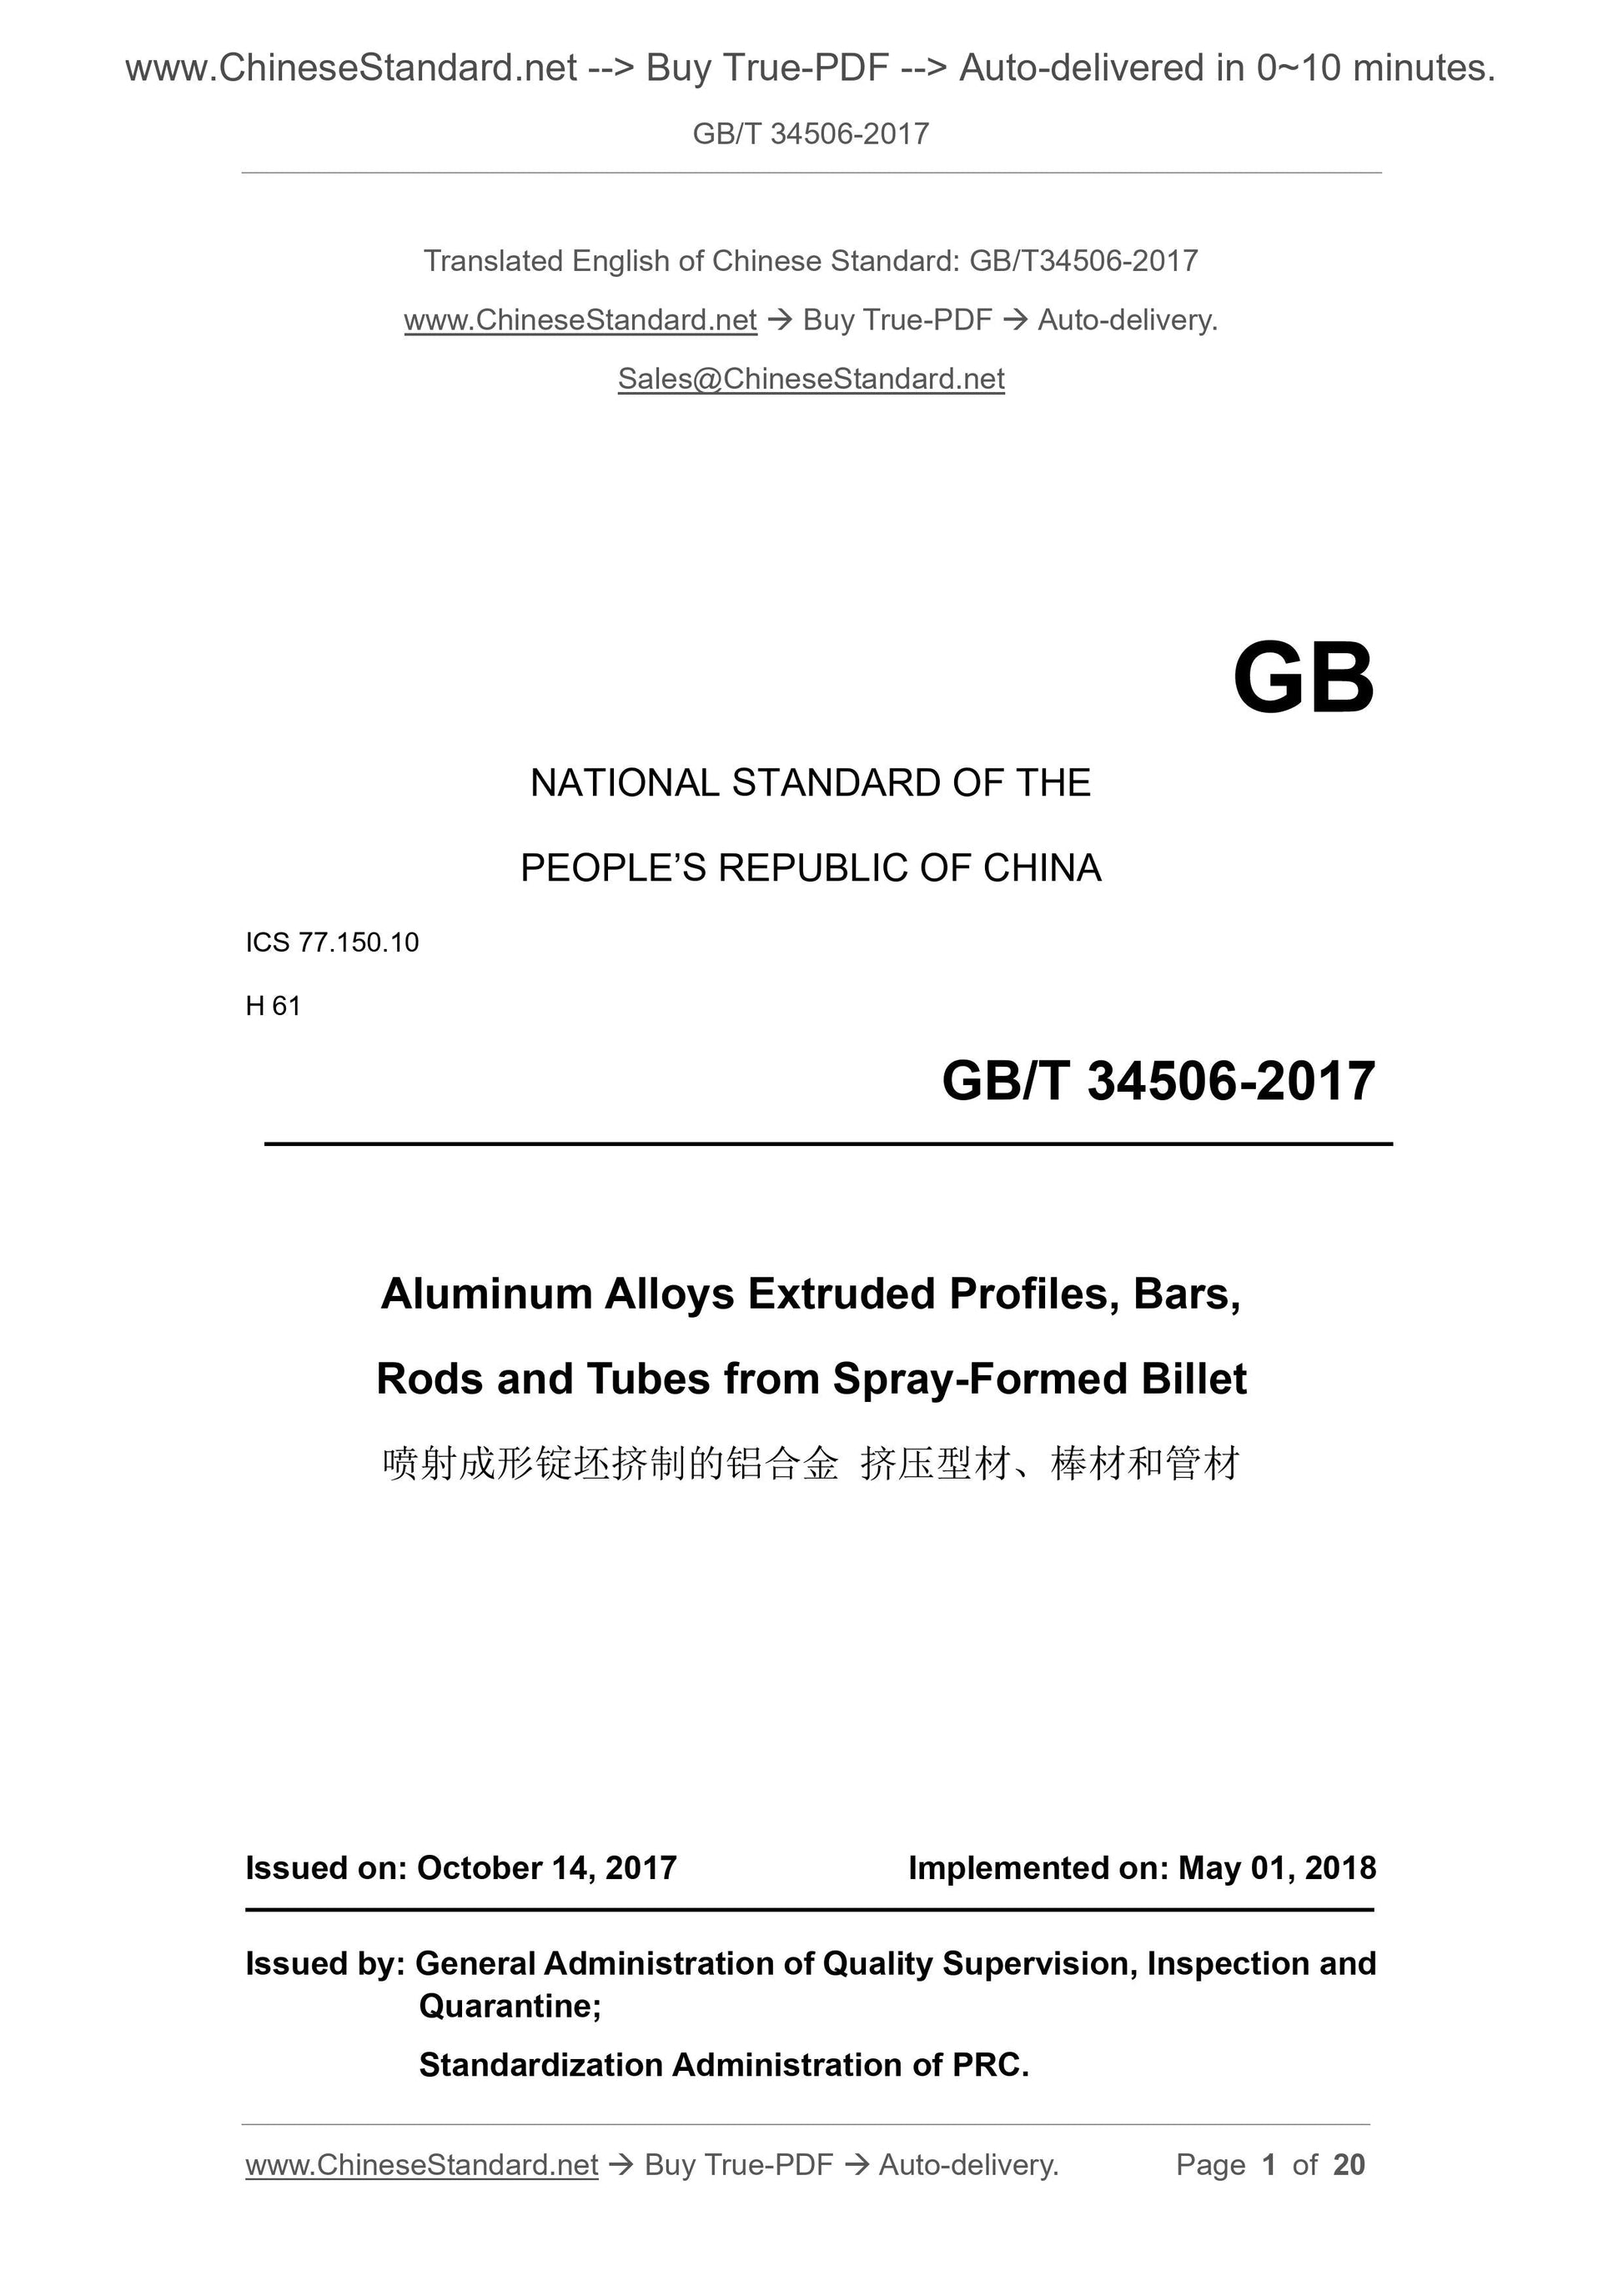 GB/T 34506-2017 Page 1